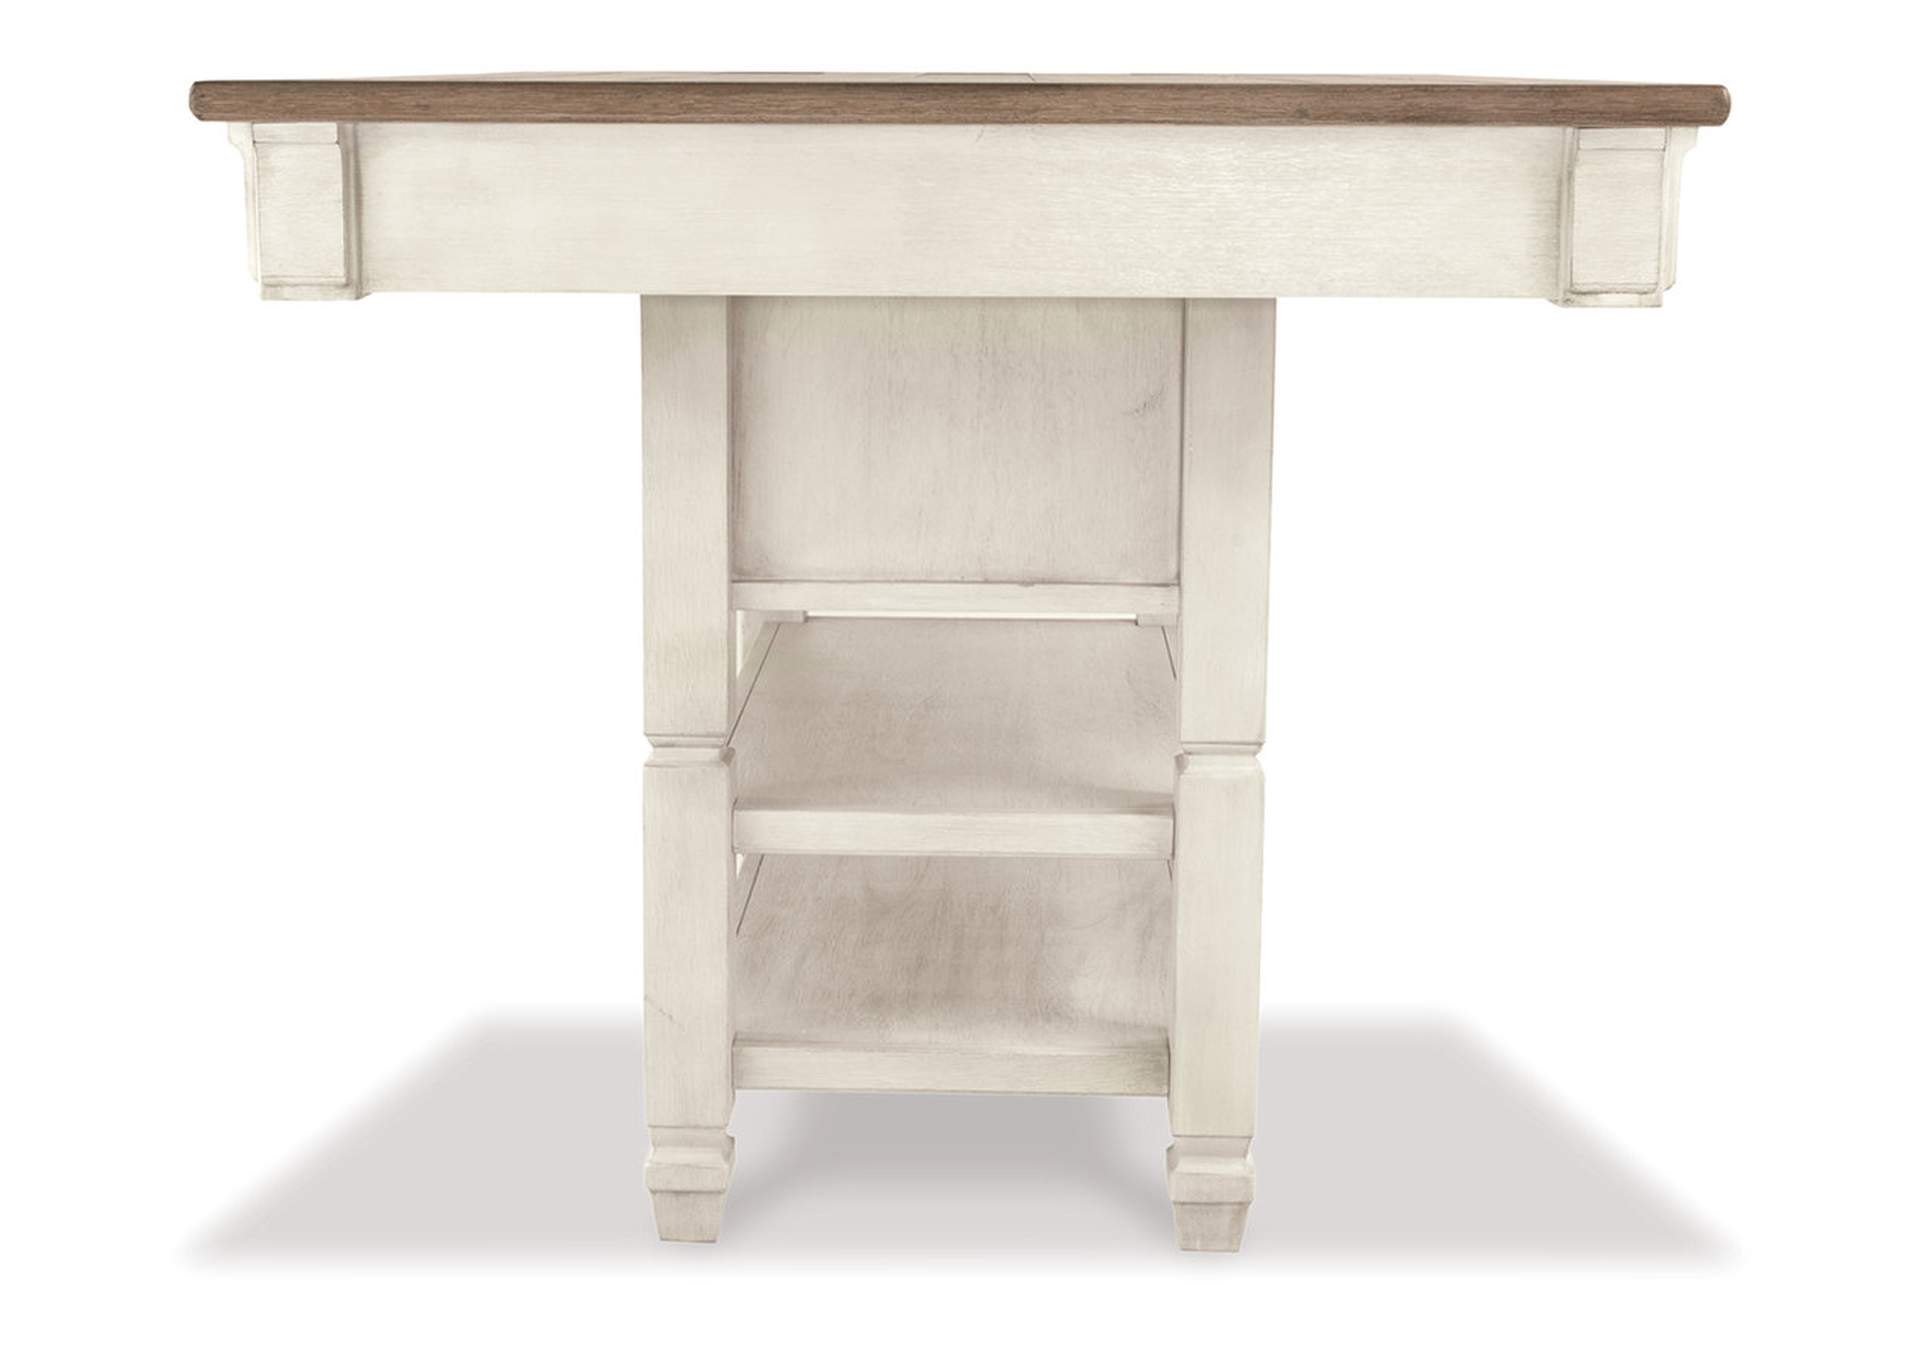 Bolanburg Counter Height Dining Table, 4 Barstools, Bench and Server,Signature Design By Ashley